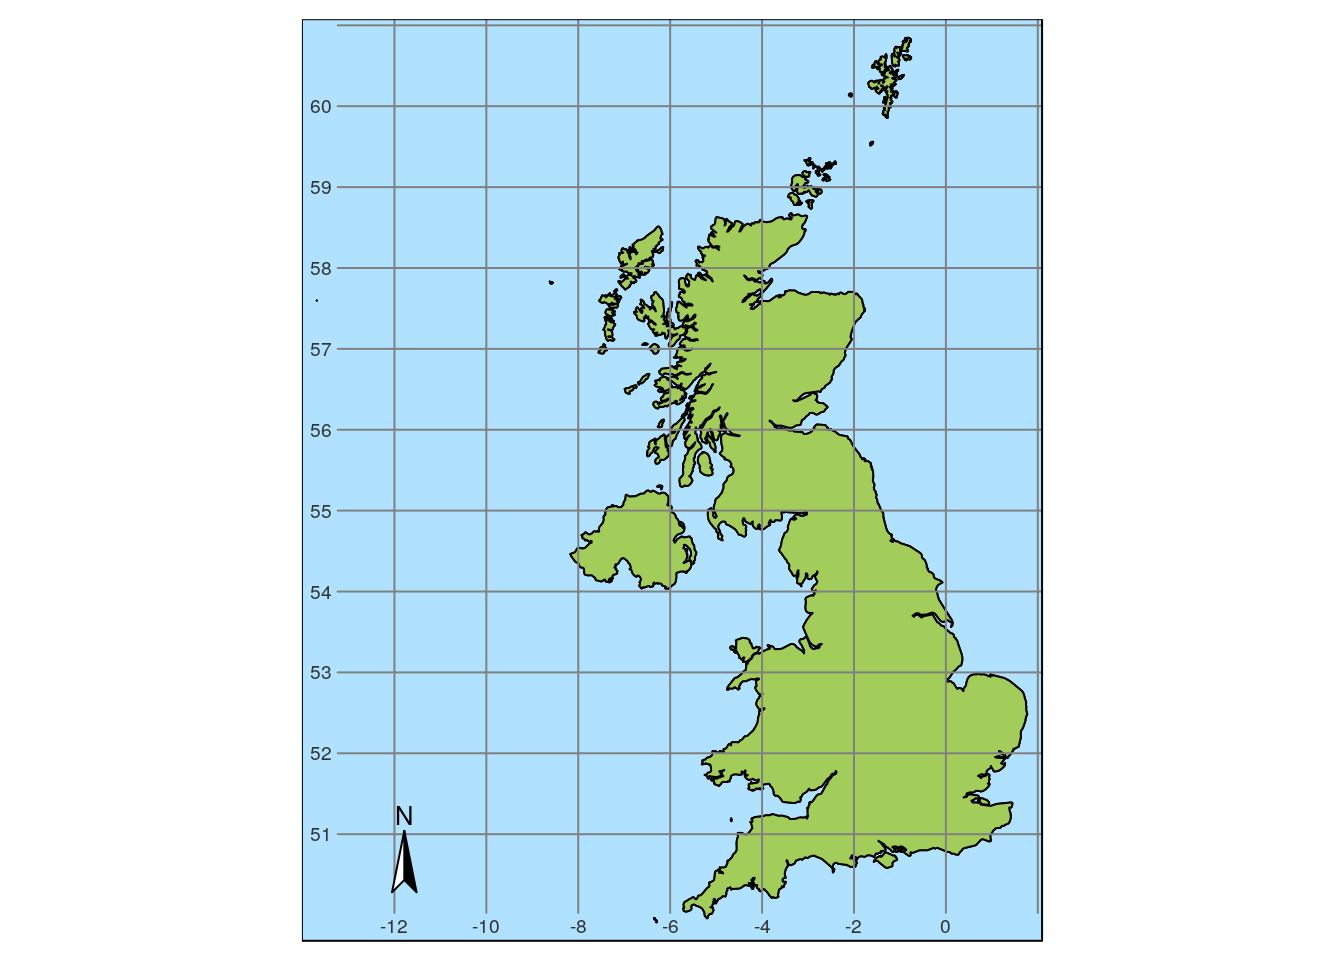 Map of the UK shown in a simple 1970s weather map type style